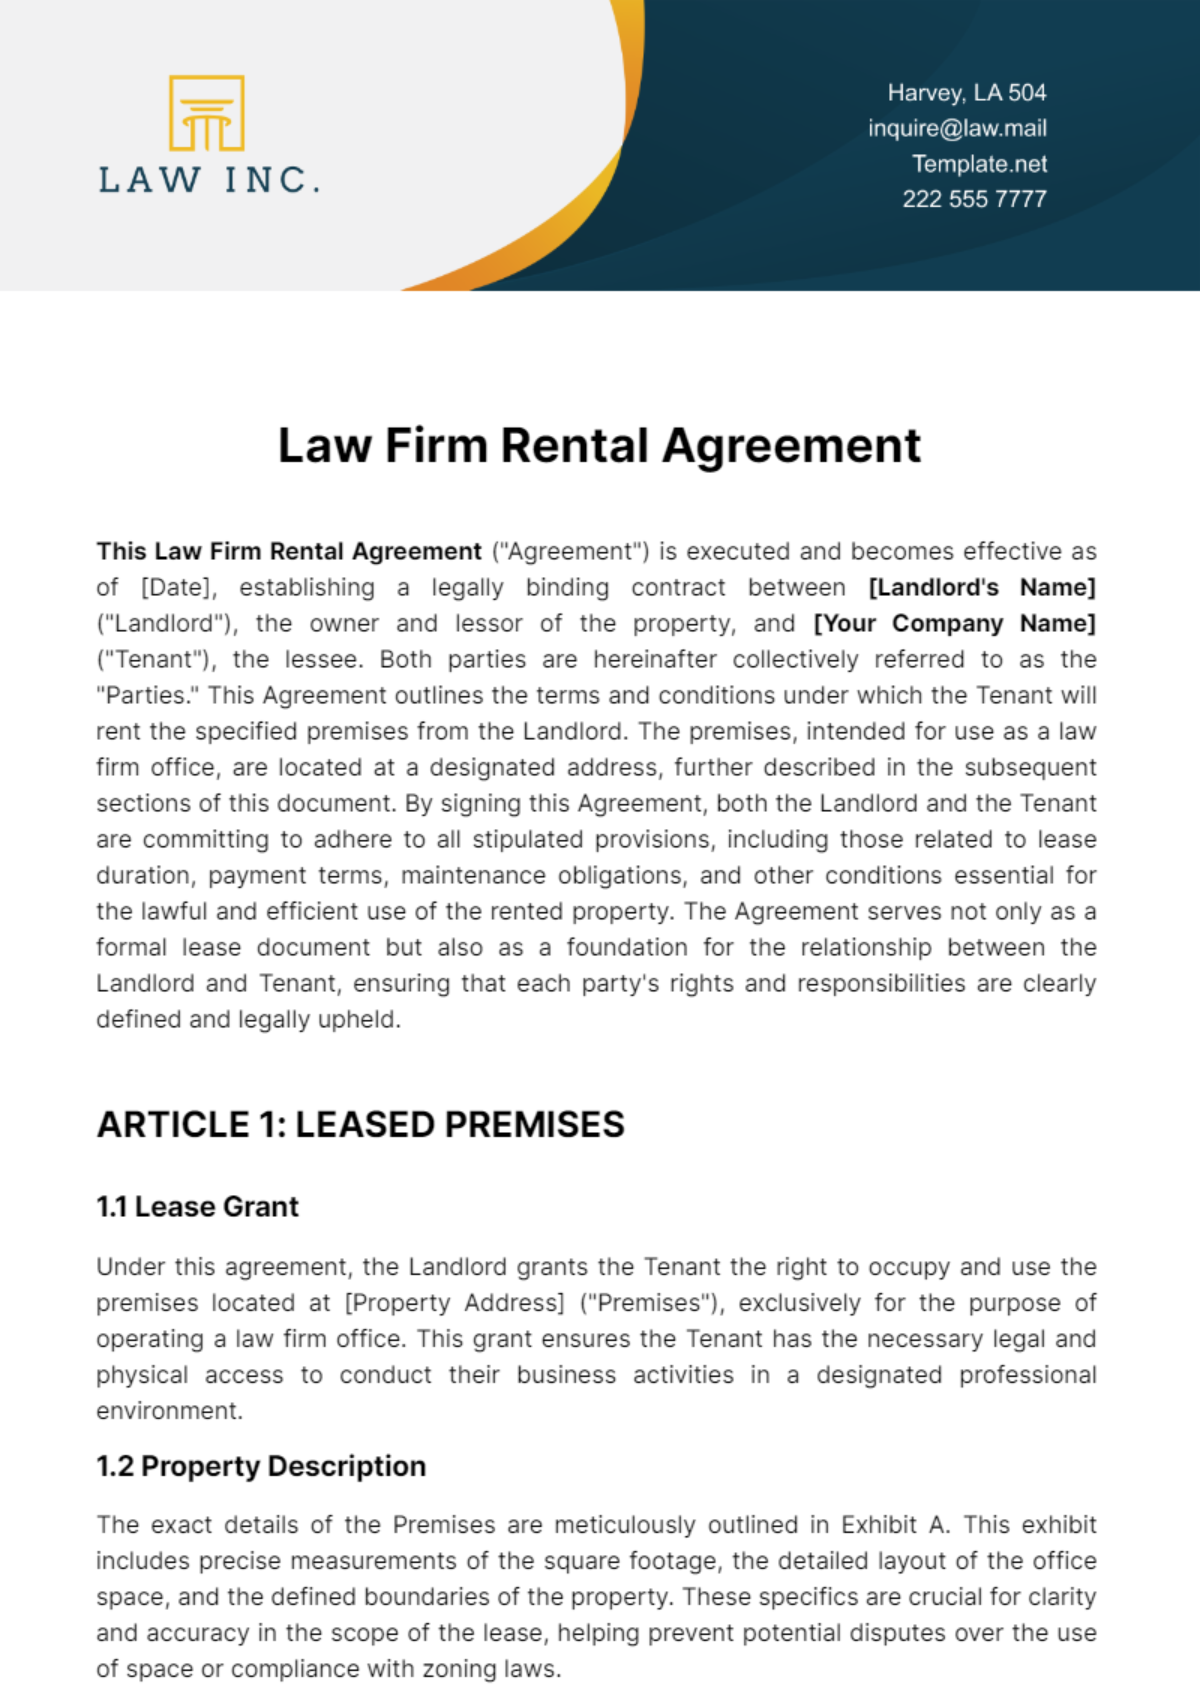 Free Law Firm Rental Agreement Template